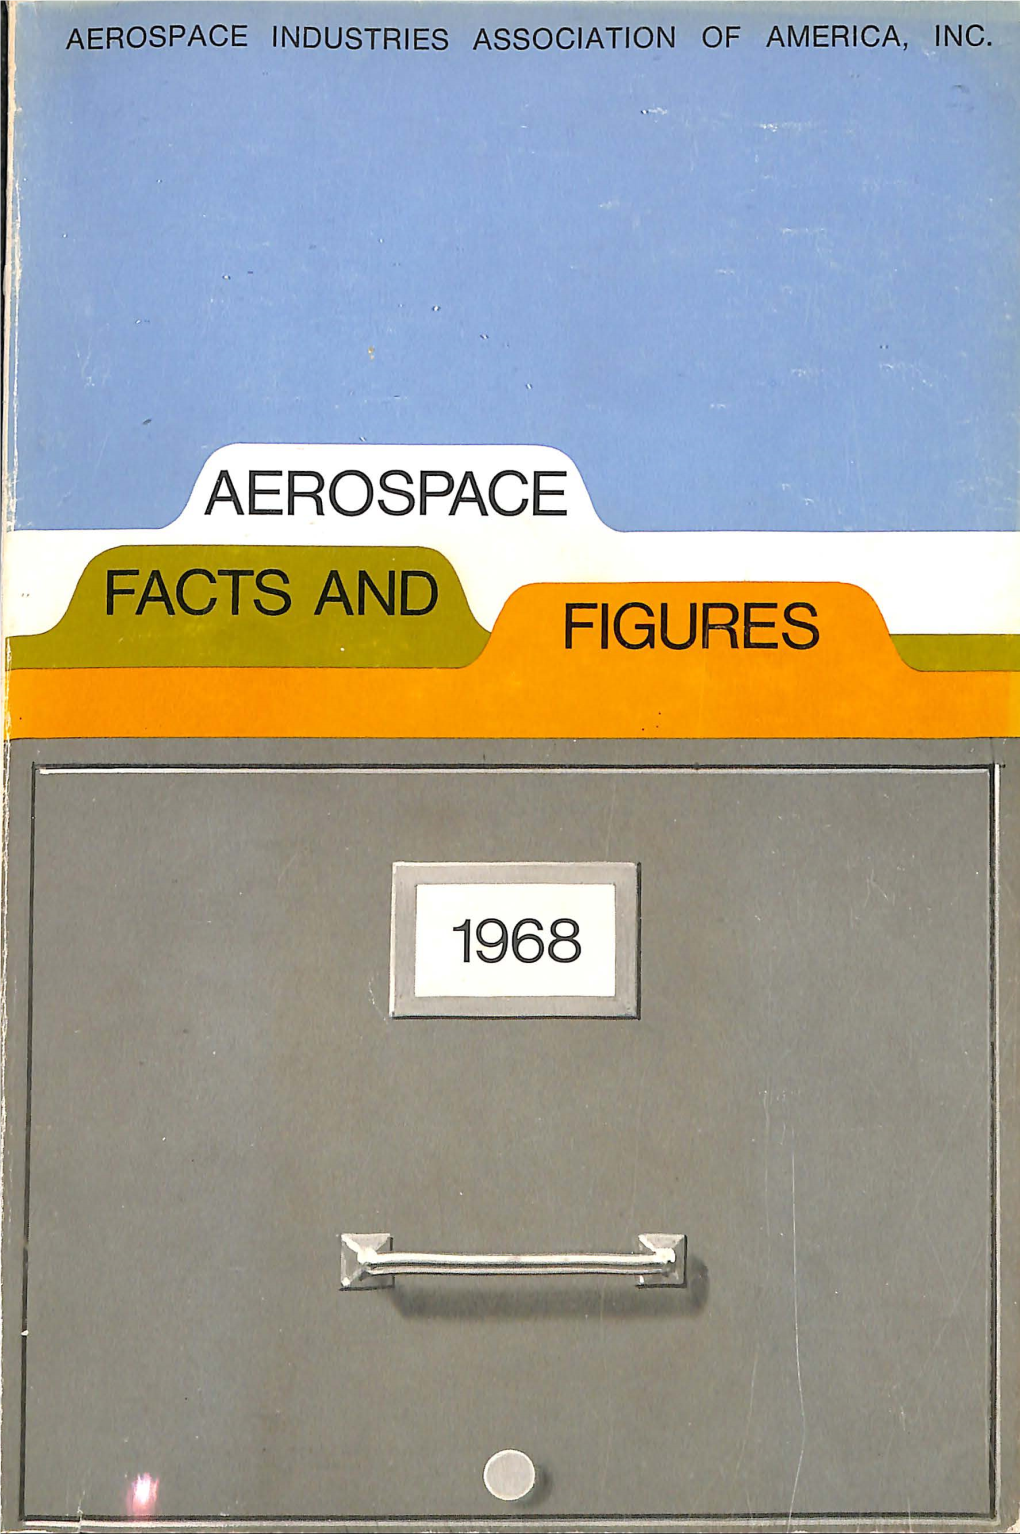 Aerospace Facts and Figures ·1968